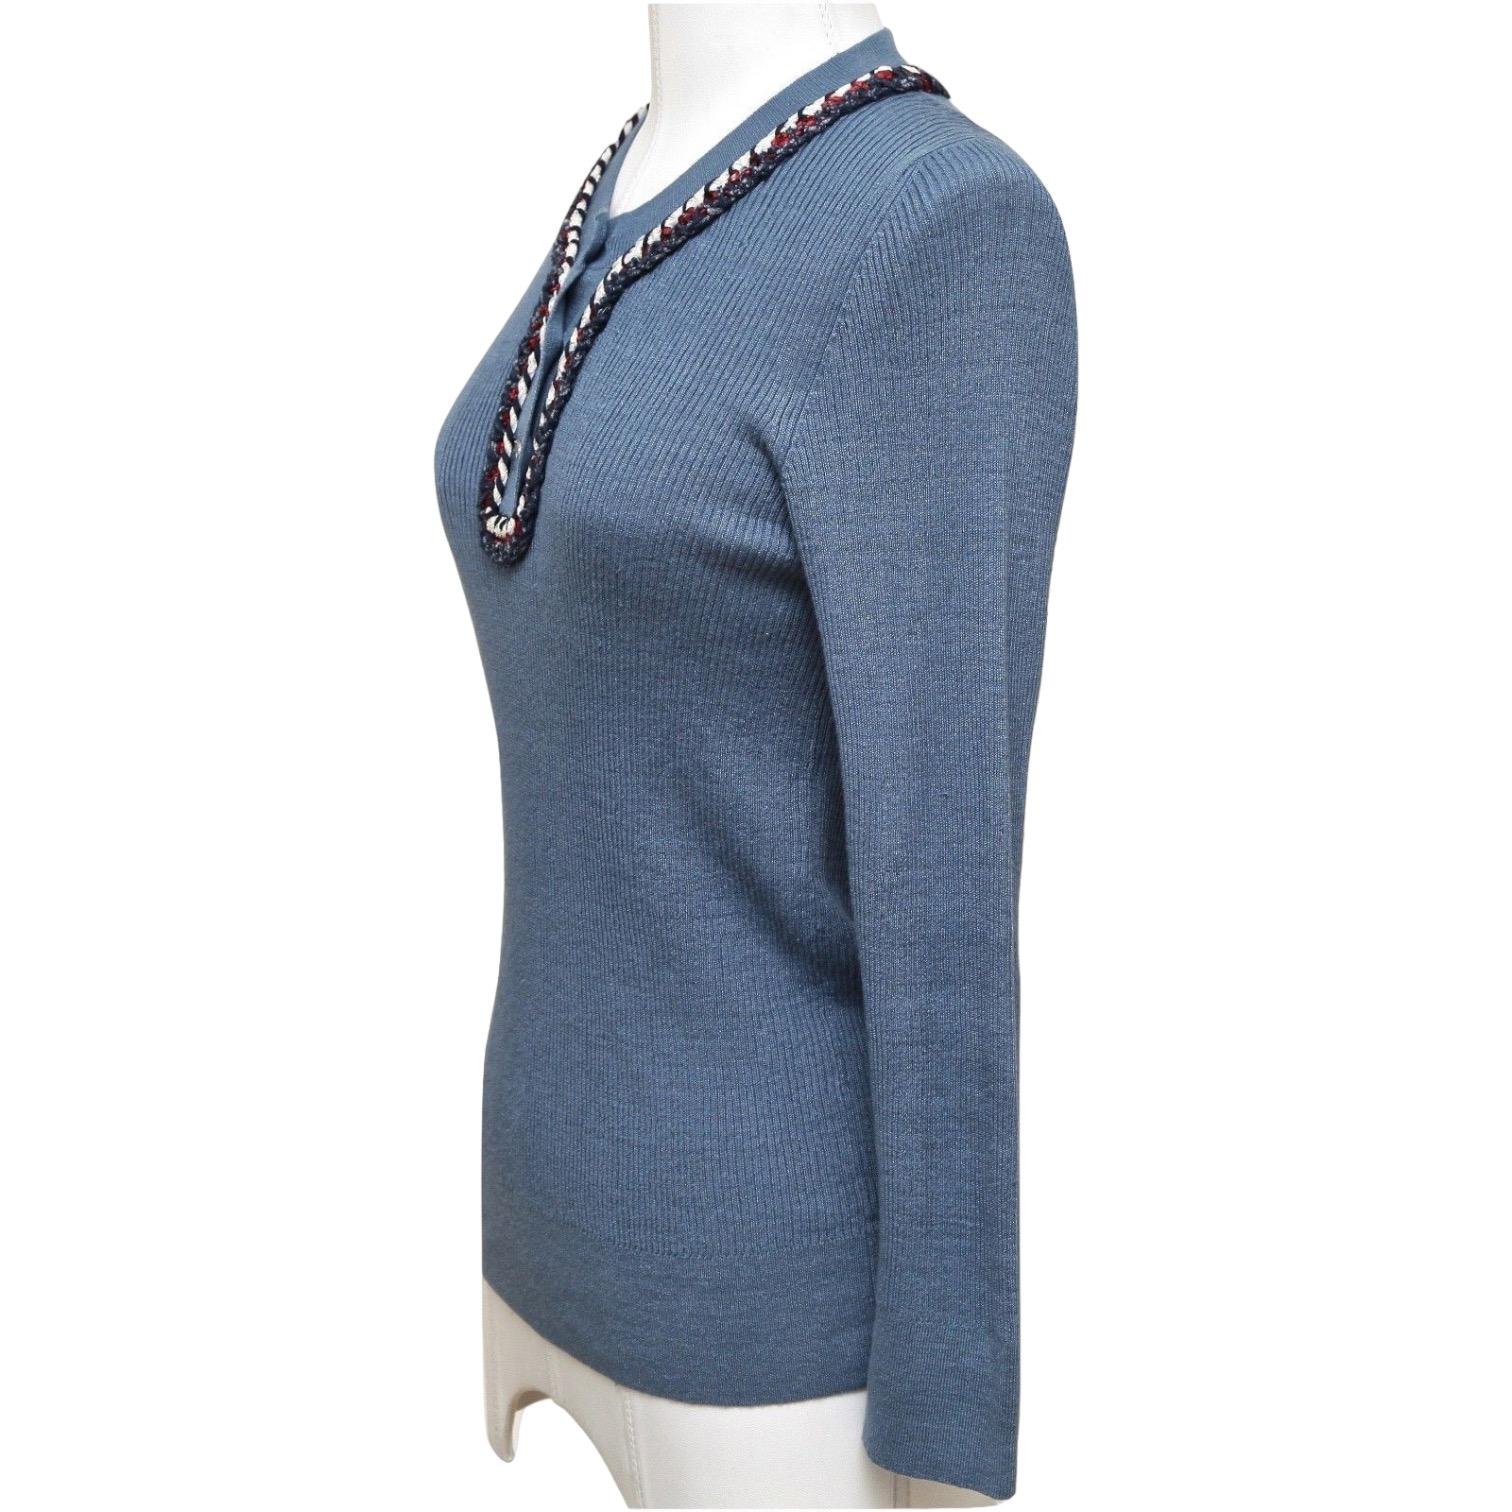 CHANEL Knit Sweater Top Long Sleeve Navy Red White Blue Silver HW 40 13C 2013 In Good Condition For Sale In Hollywood, FL